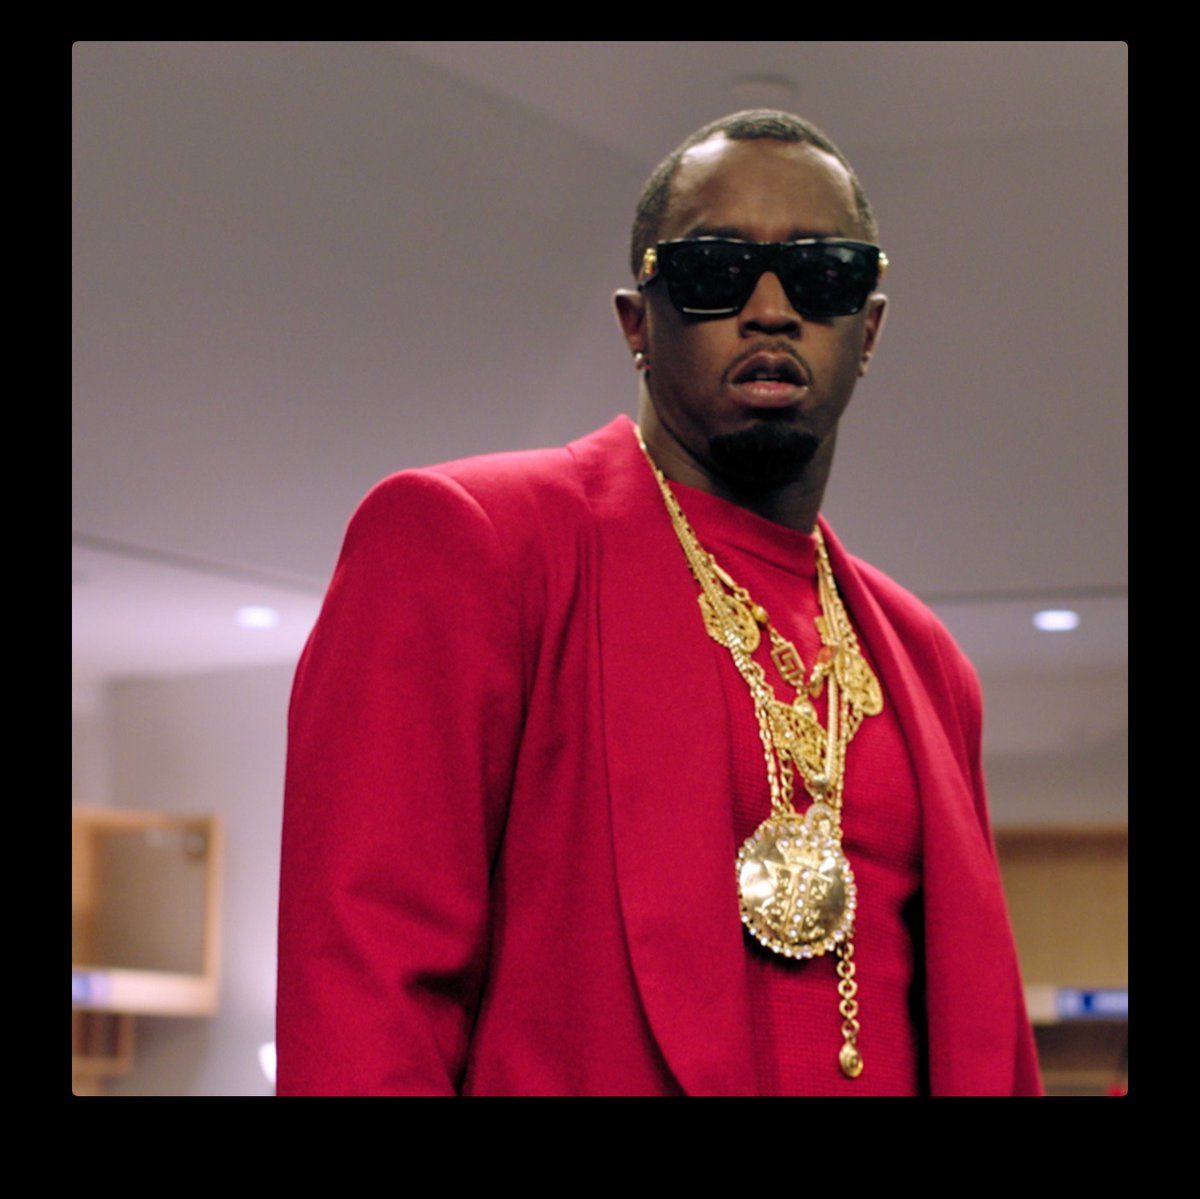 RT @iTunesMovies: This is @Diddy's legendary legacy.
Own #CantStopWontStop now on iTunes.
https://t.co/DKt0CovSpu https://t.co/N38H1WxiDp